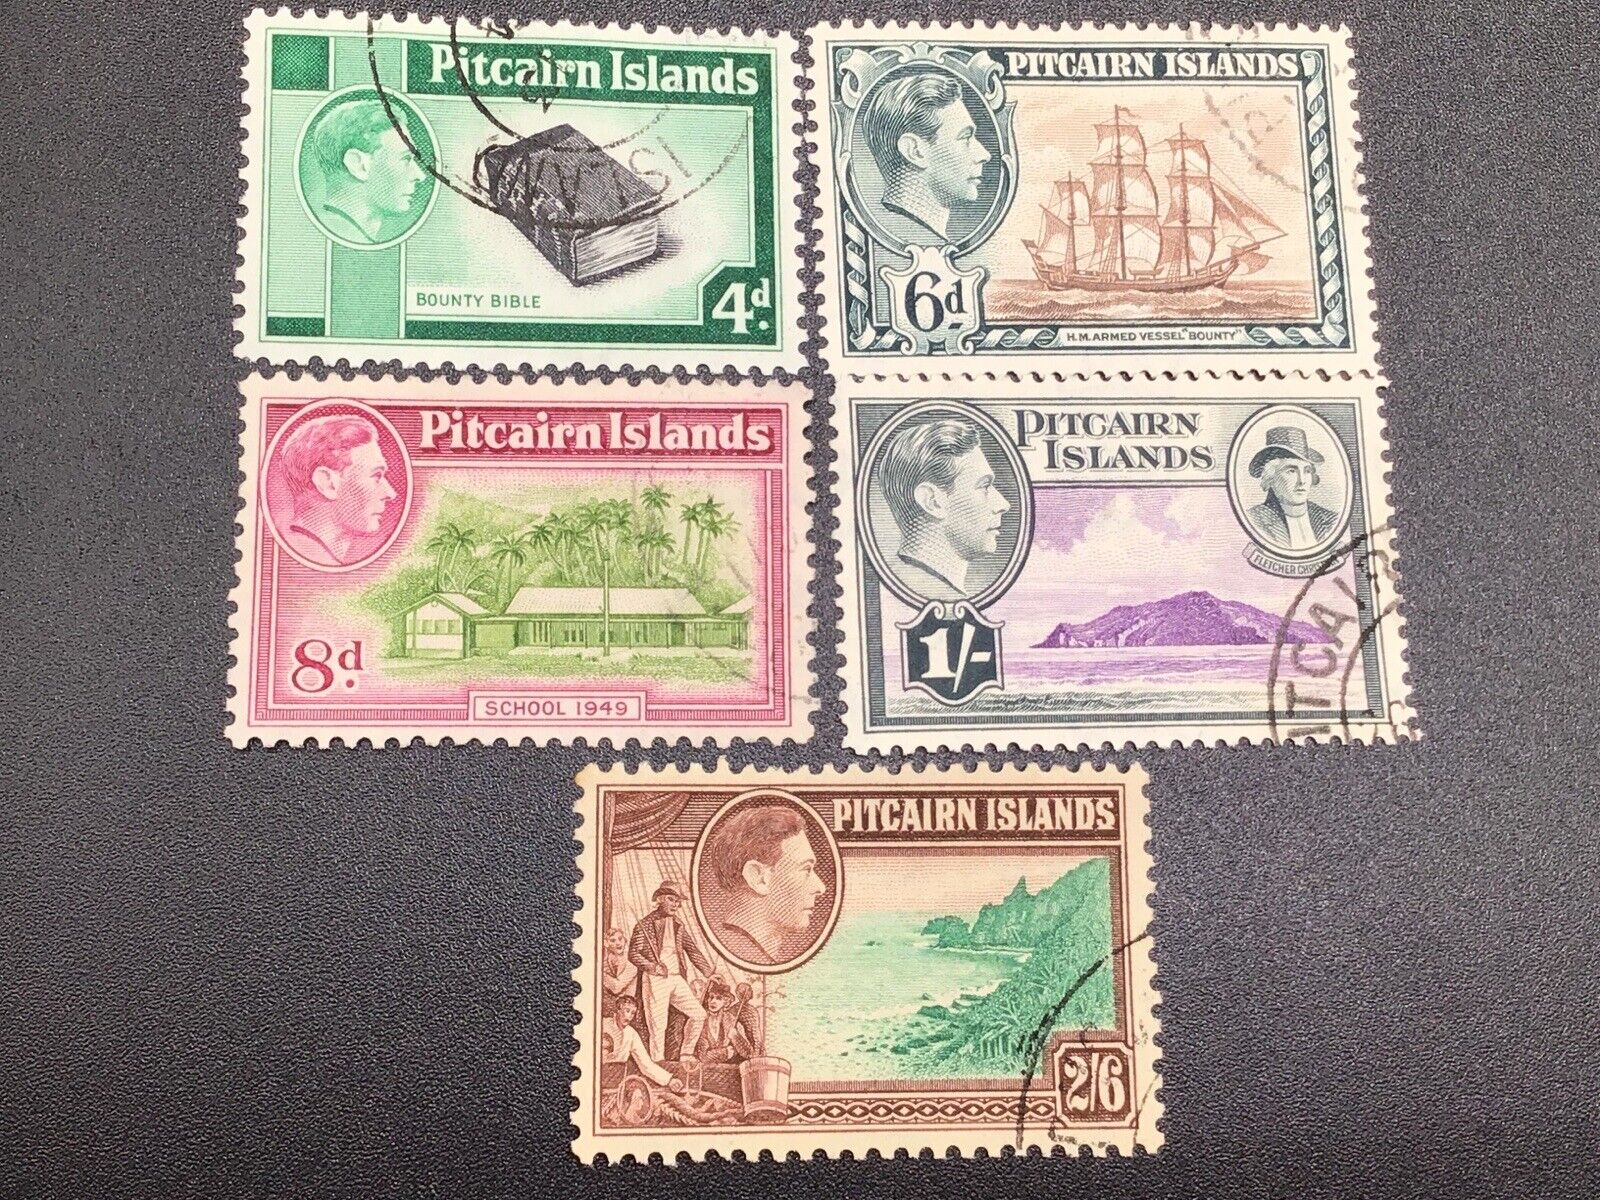 Pitcairn Islands 1950 KGVI part set of five used stamps.   P103